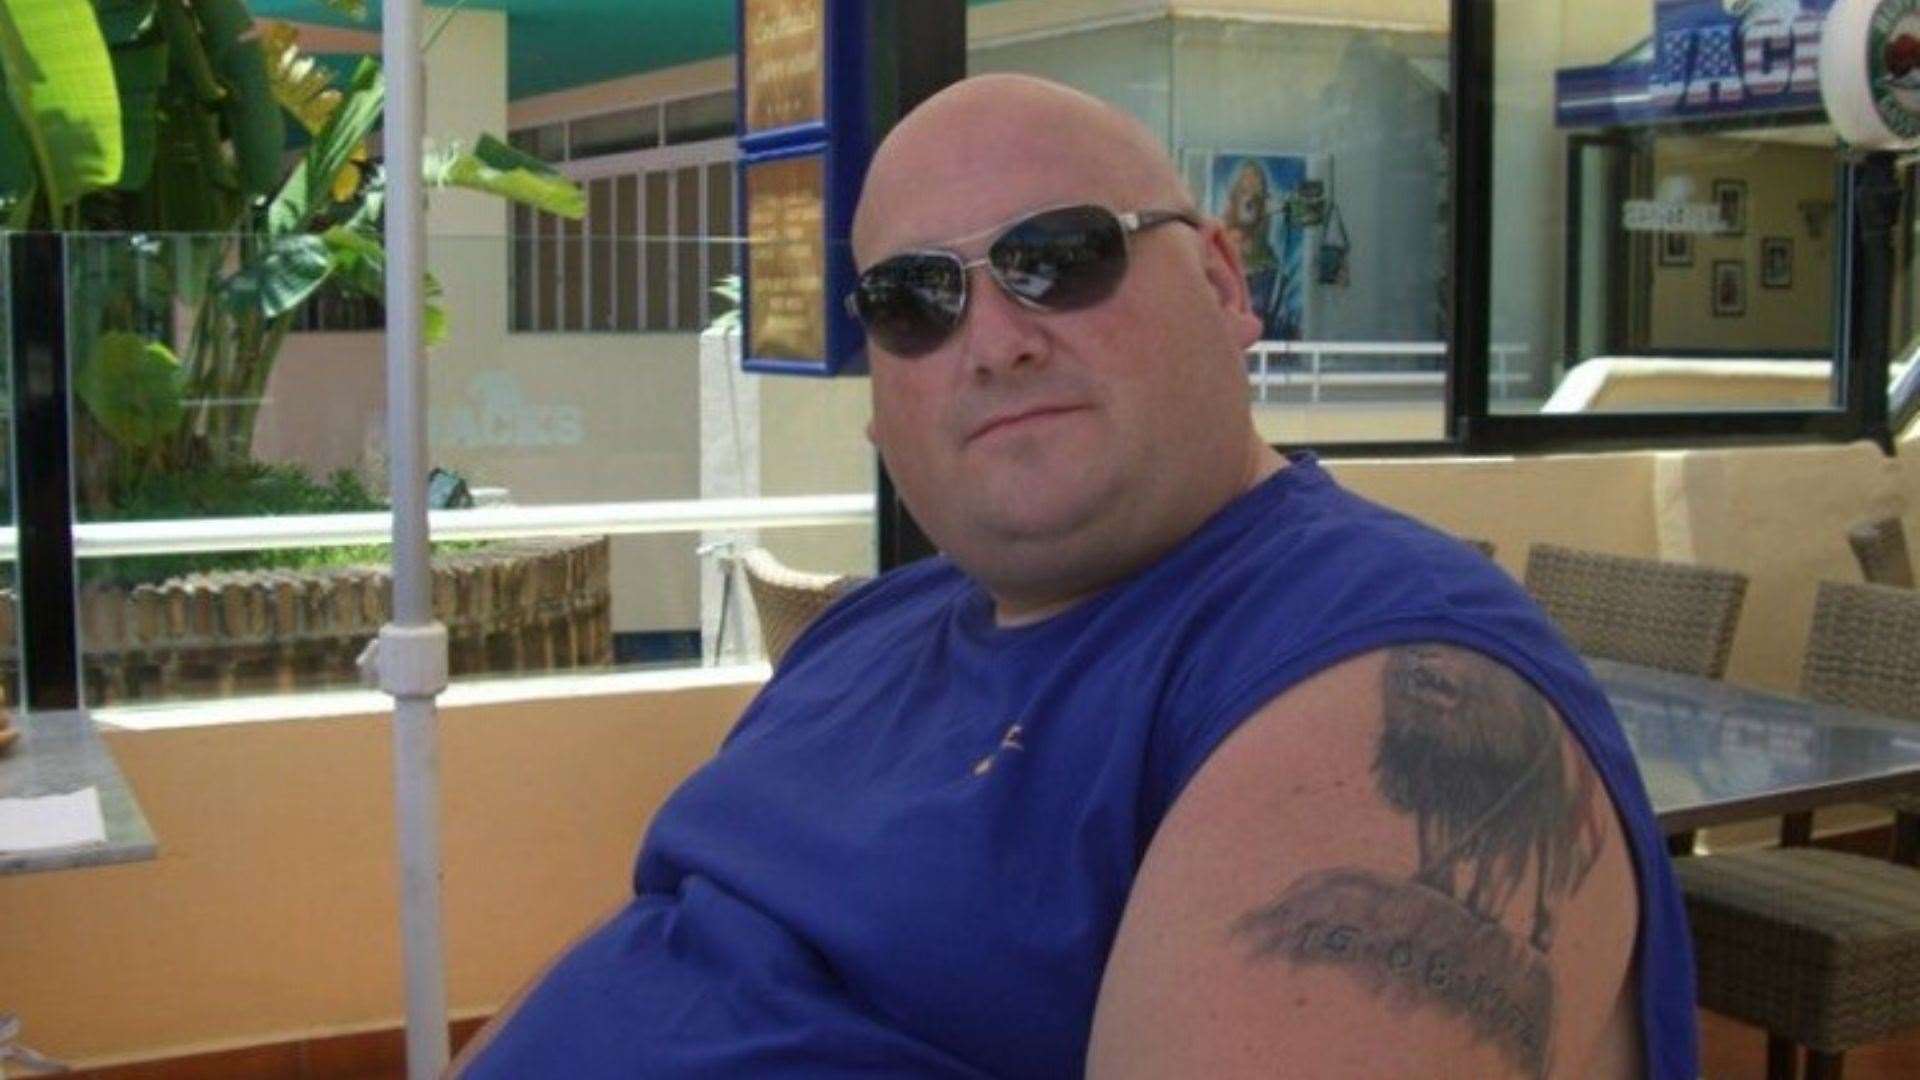 Carl weighed 33 stone eight years ago